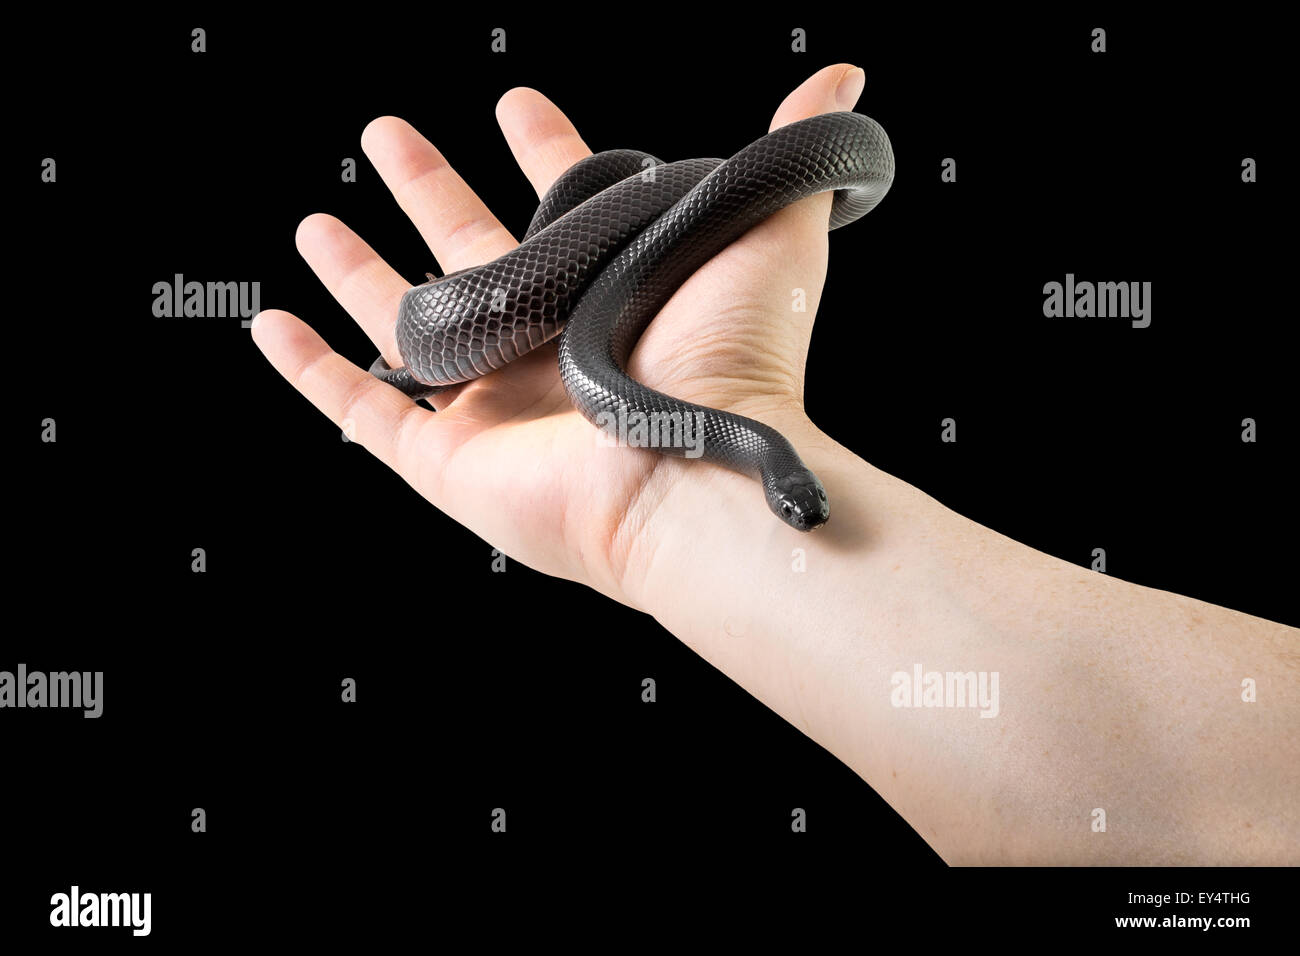 Snake in hand Stock Photo